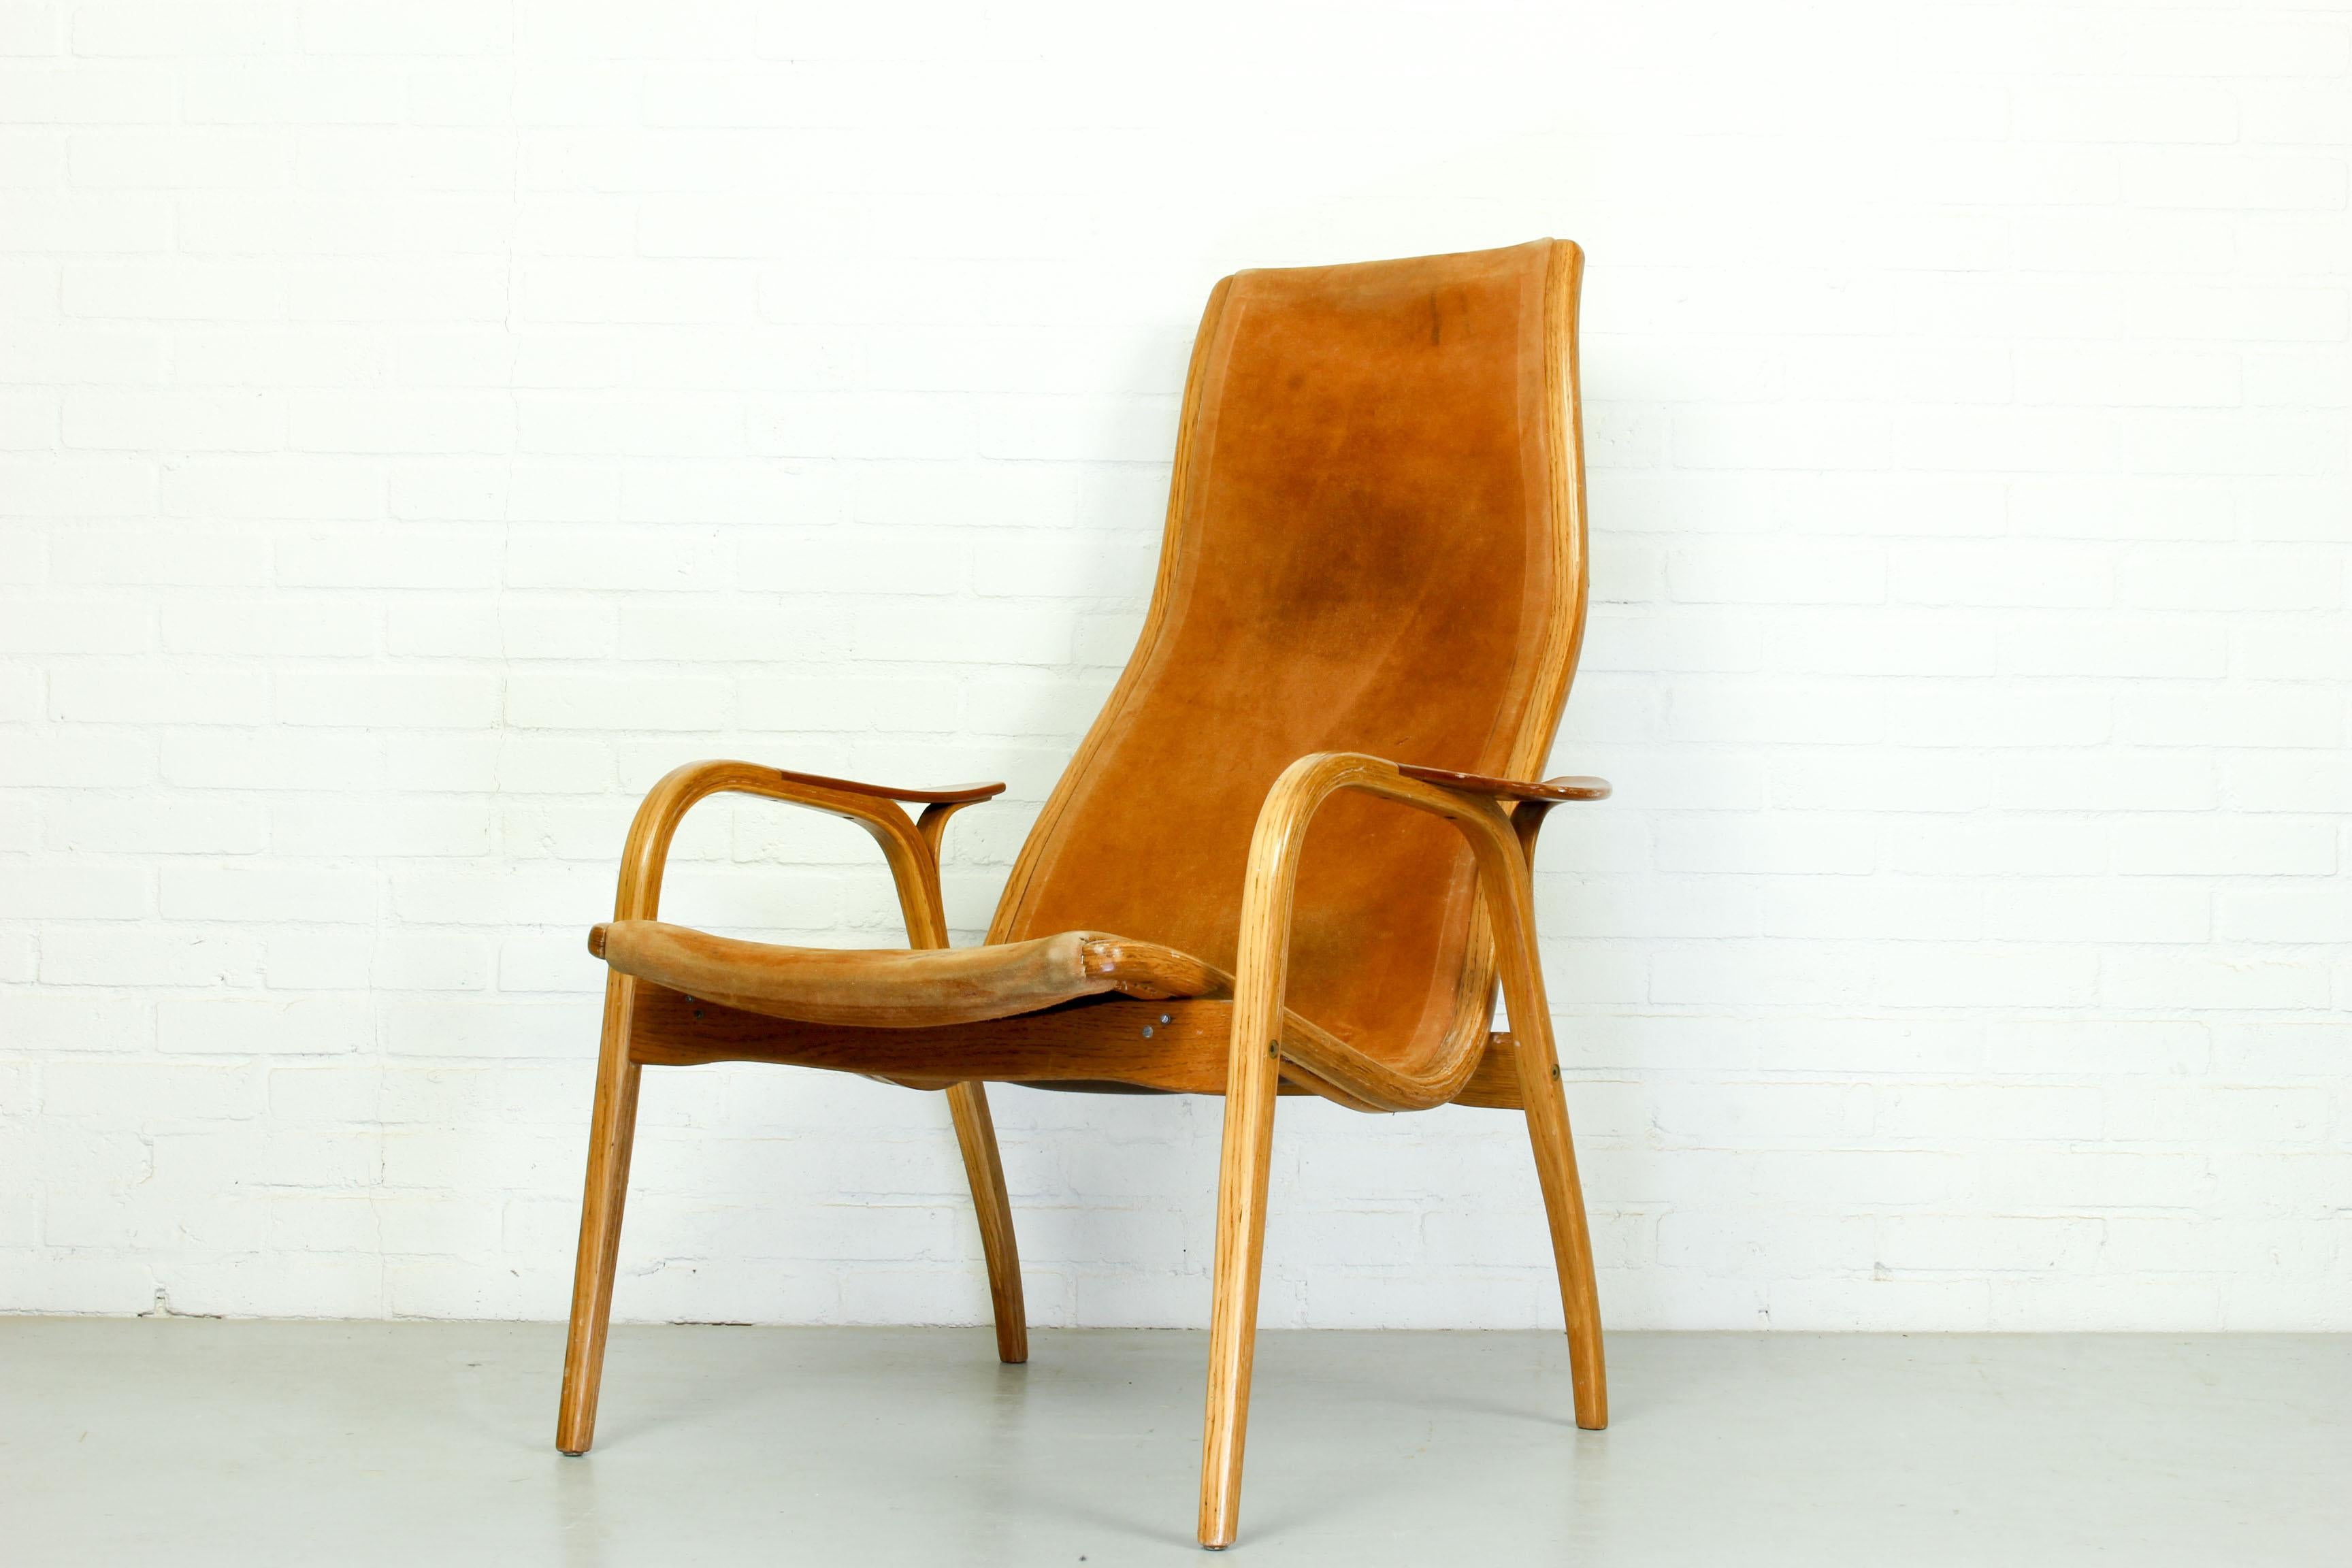 ‘Lamino' armchair in oak with teak armrest designed by Yngve Ekström and made by Swedese. Teak and leather, Sweden, 1970s.